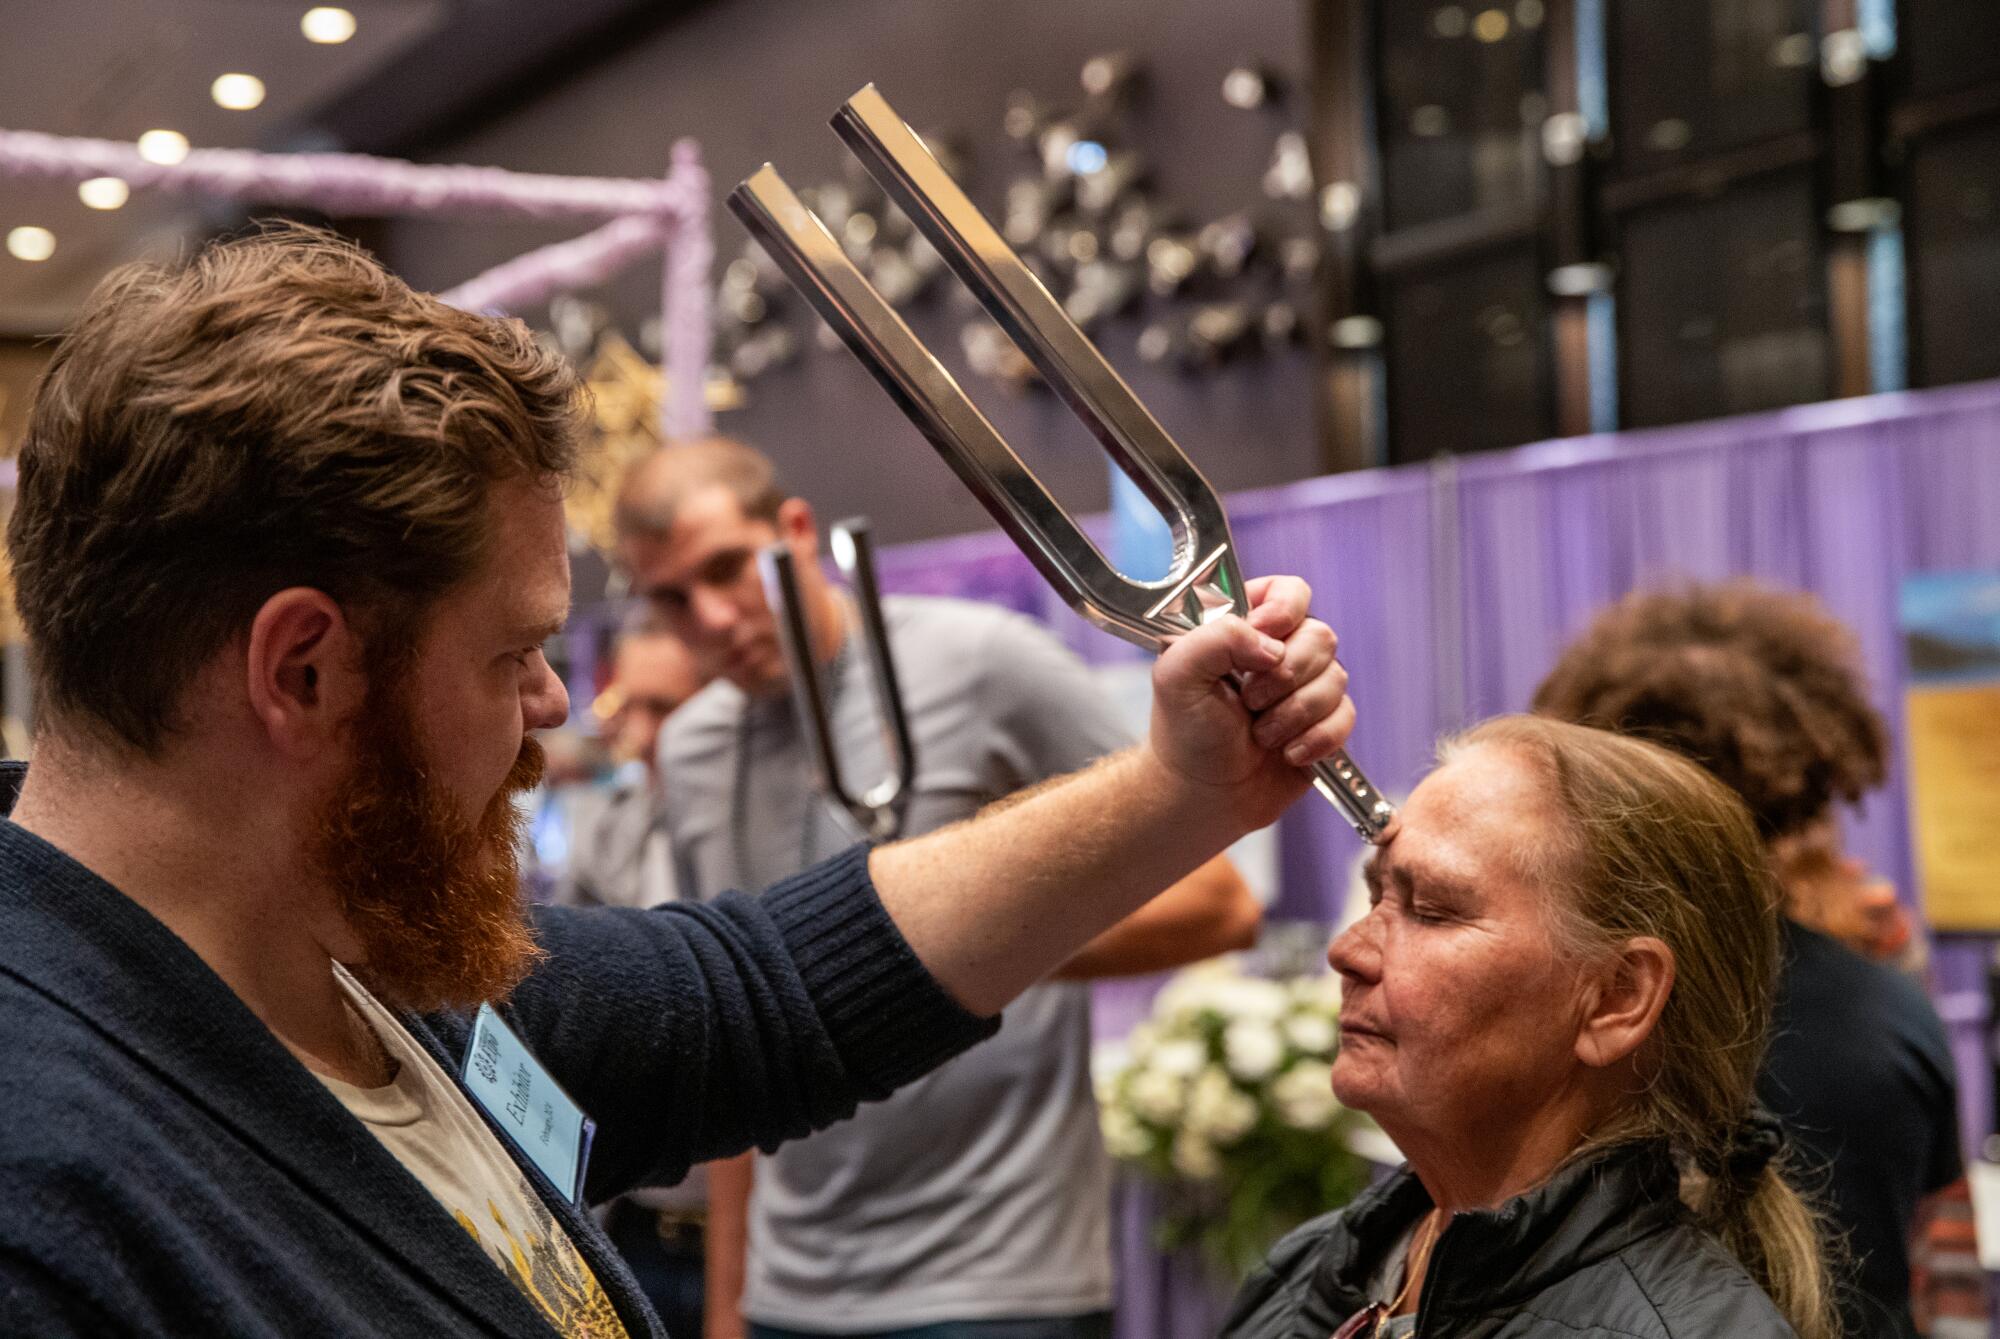 Eric Villhauer holds a giant tuning fork used as a sound therapy tool on the forehead of Denise Visco.